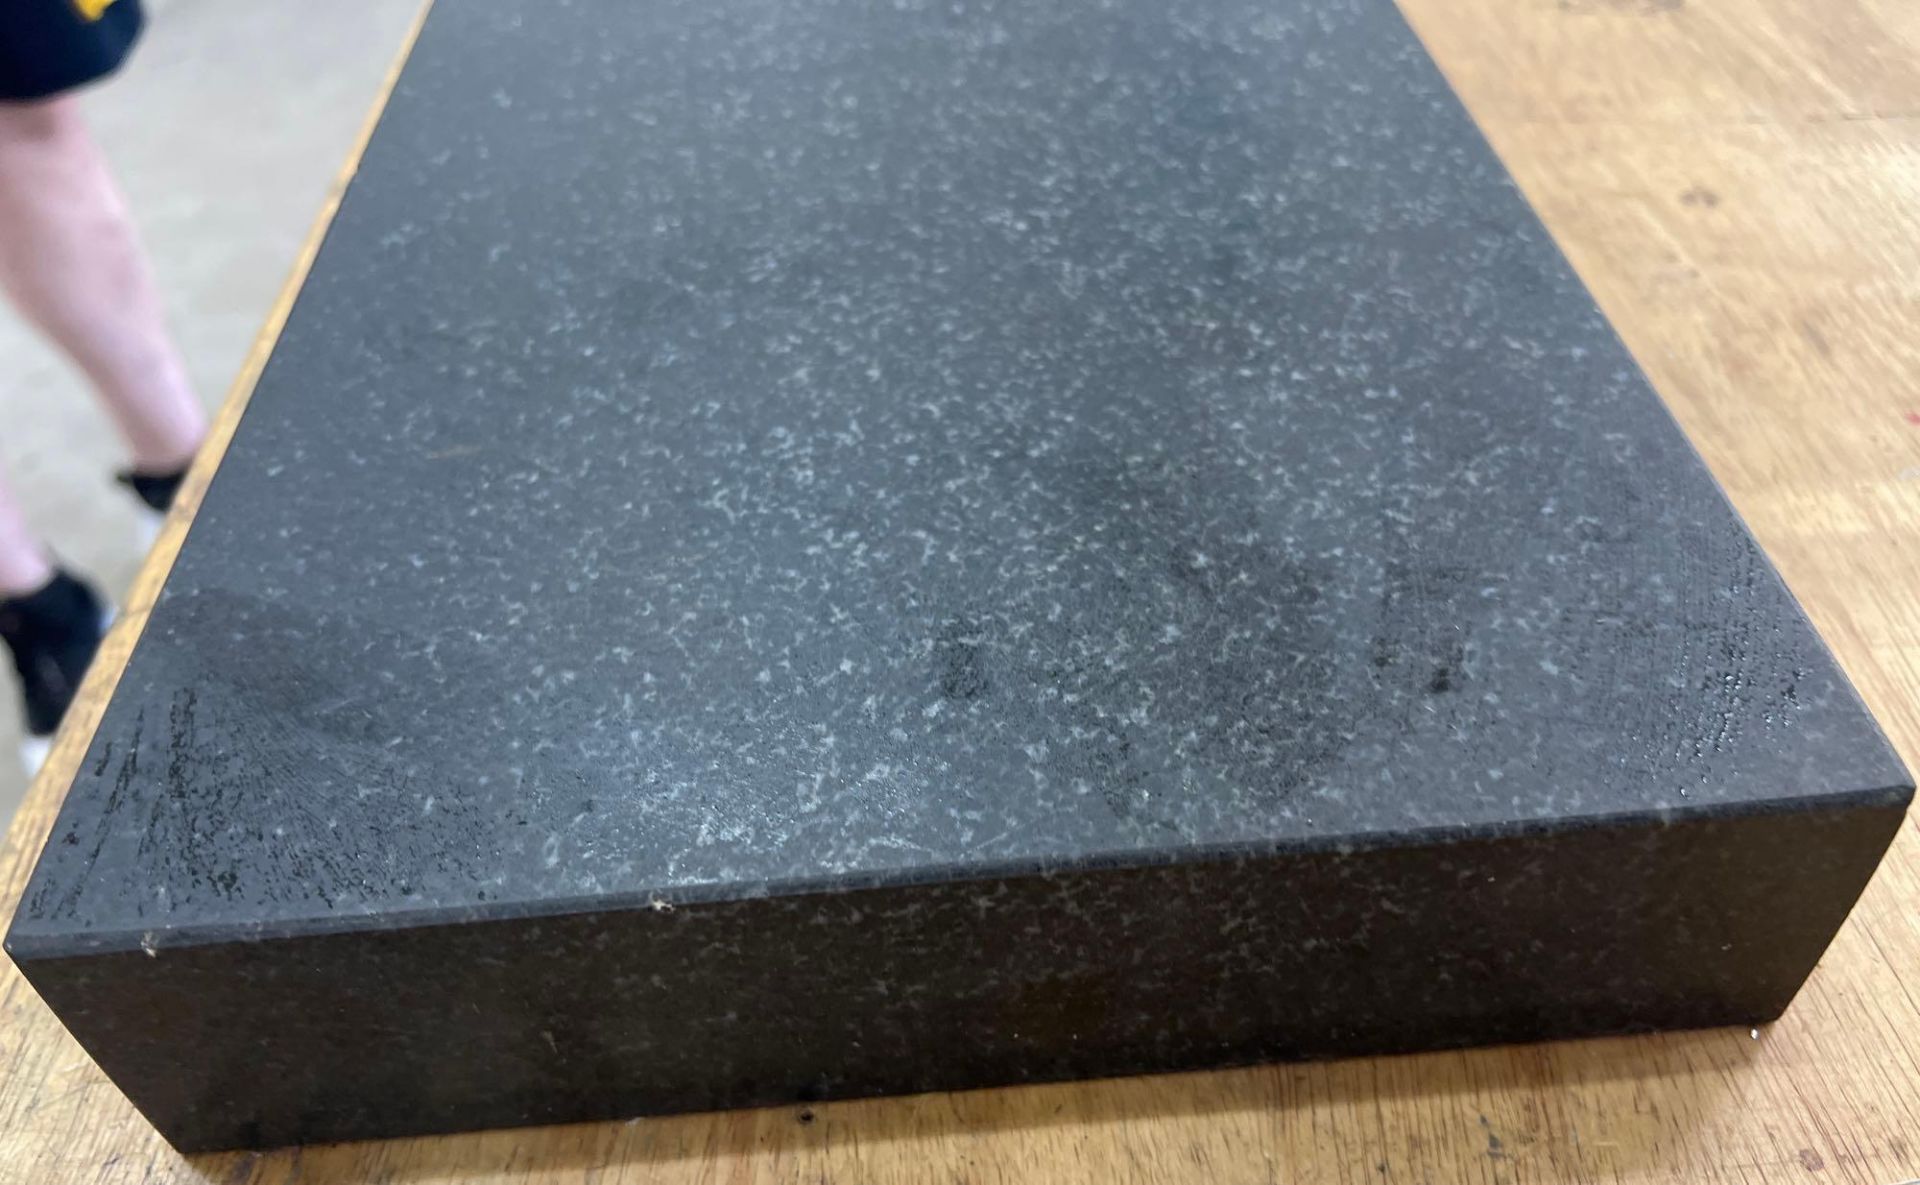 12"x9"x2" Granite Inspection Plate - Image 2 of 7